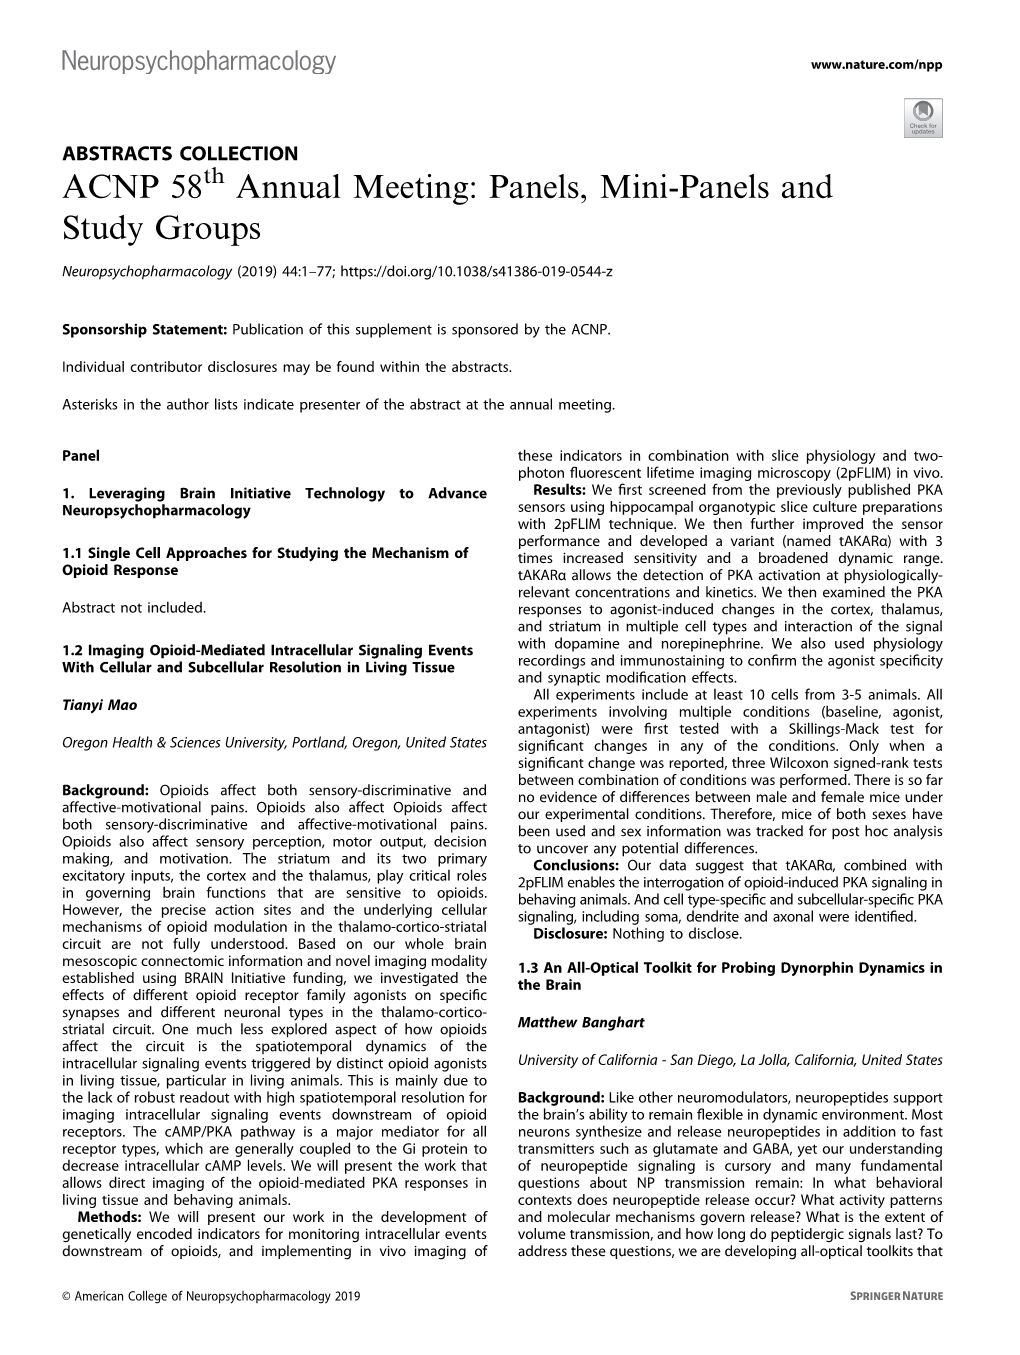 ACNP 58Th Annual Meeting: Panels, Mini-Panels and Study Groups